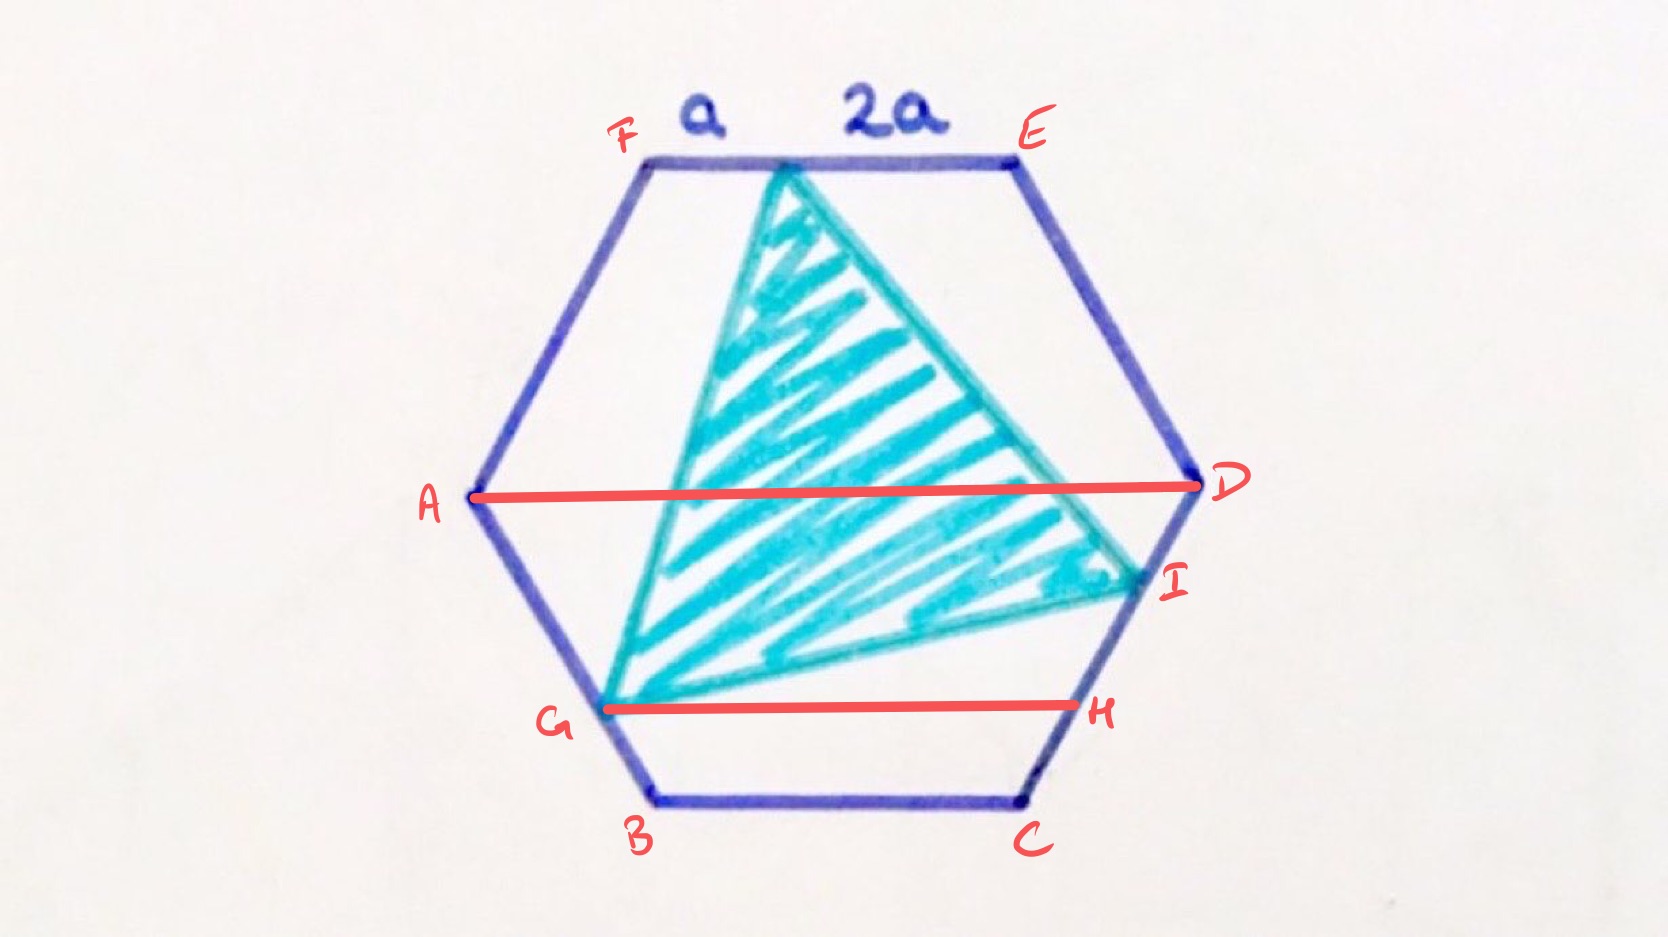 Equilateral triangle in a hexagon labelled 